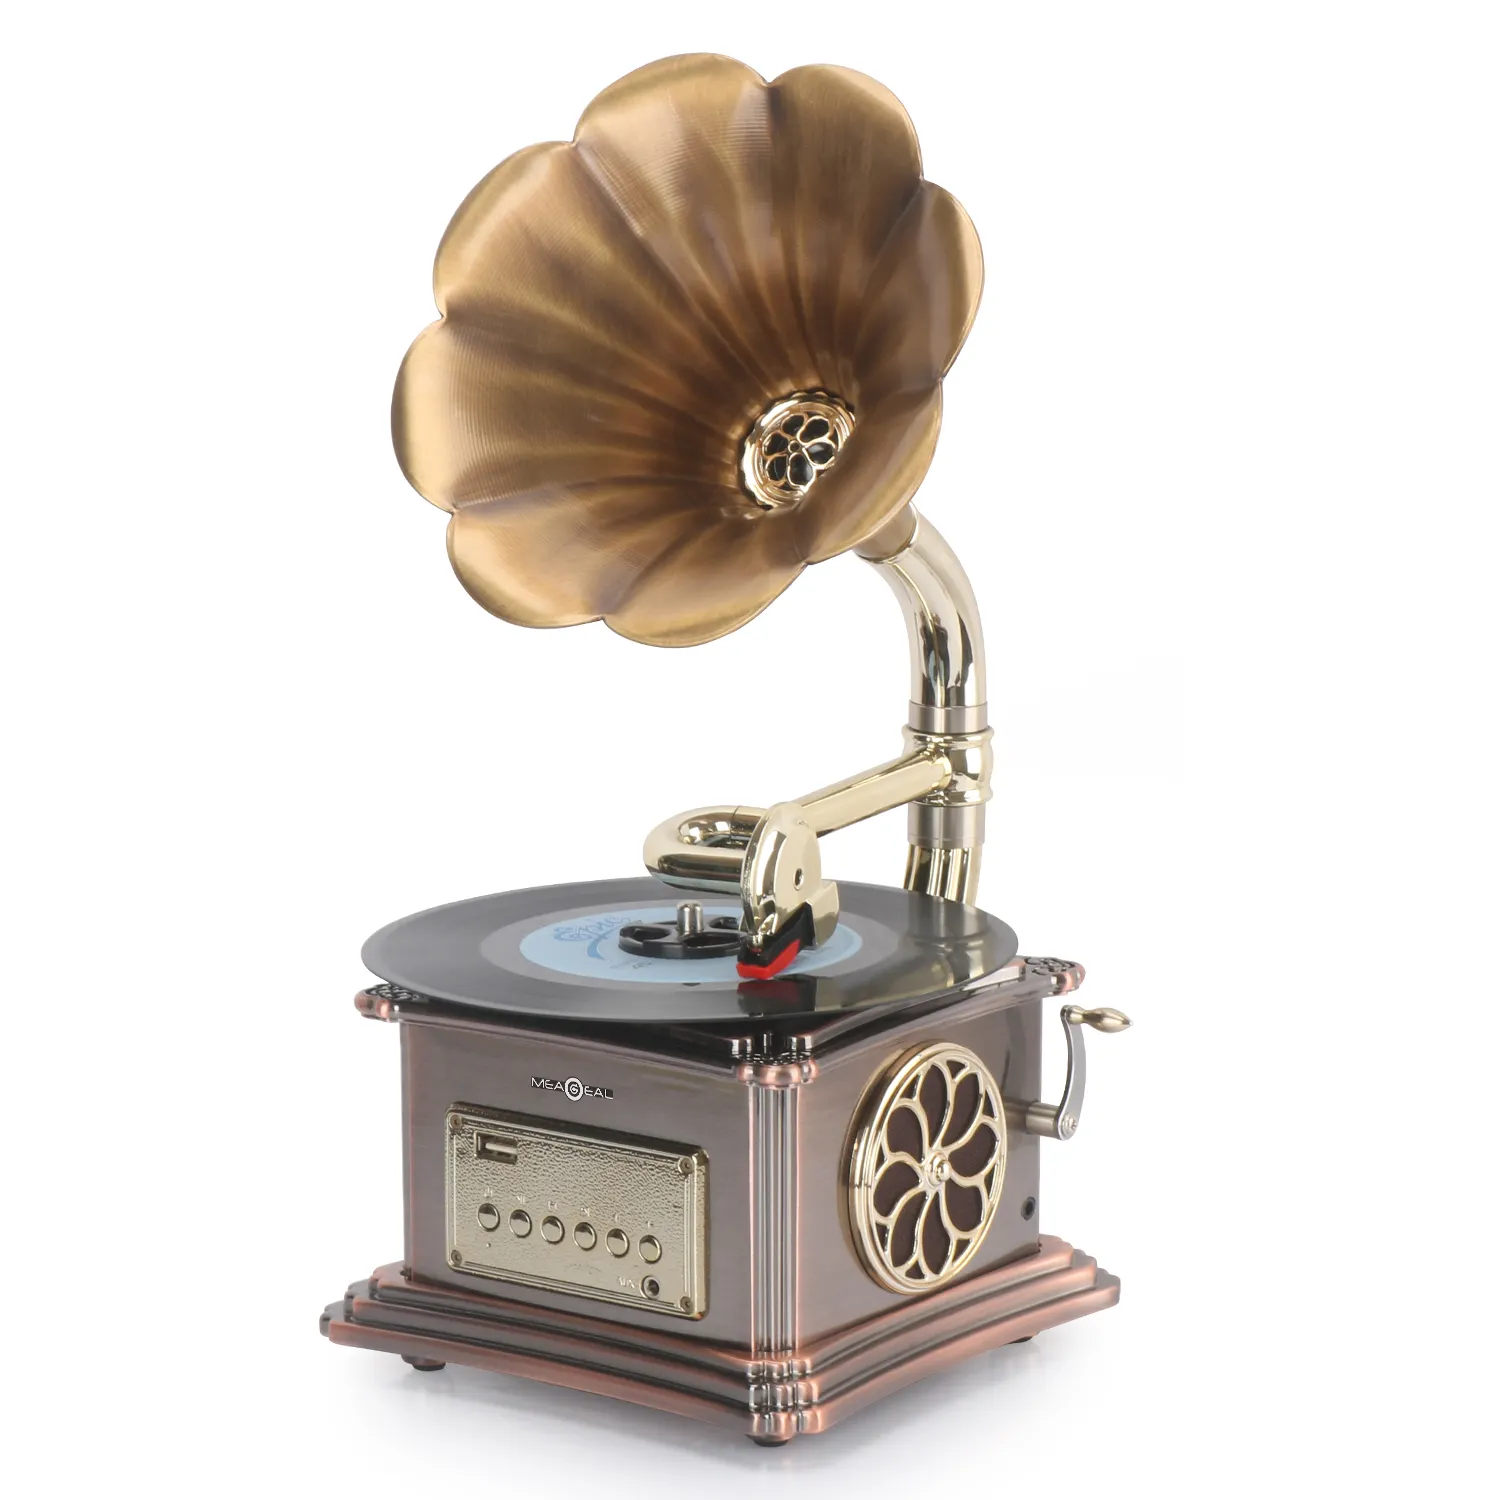 Gramophone Phonograph Turntable Vinyl Record Player Home Decoration Built-in Bluetooth, FM Radio & USB Flash Drive, Aux-in Jack,